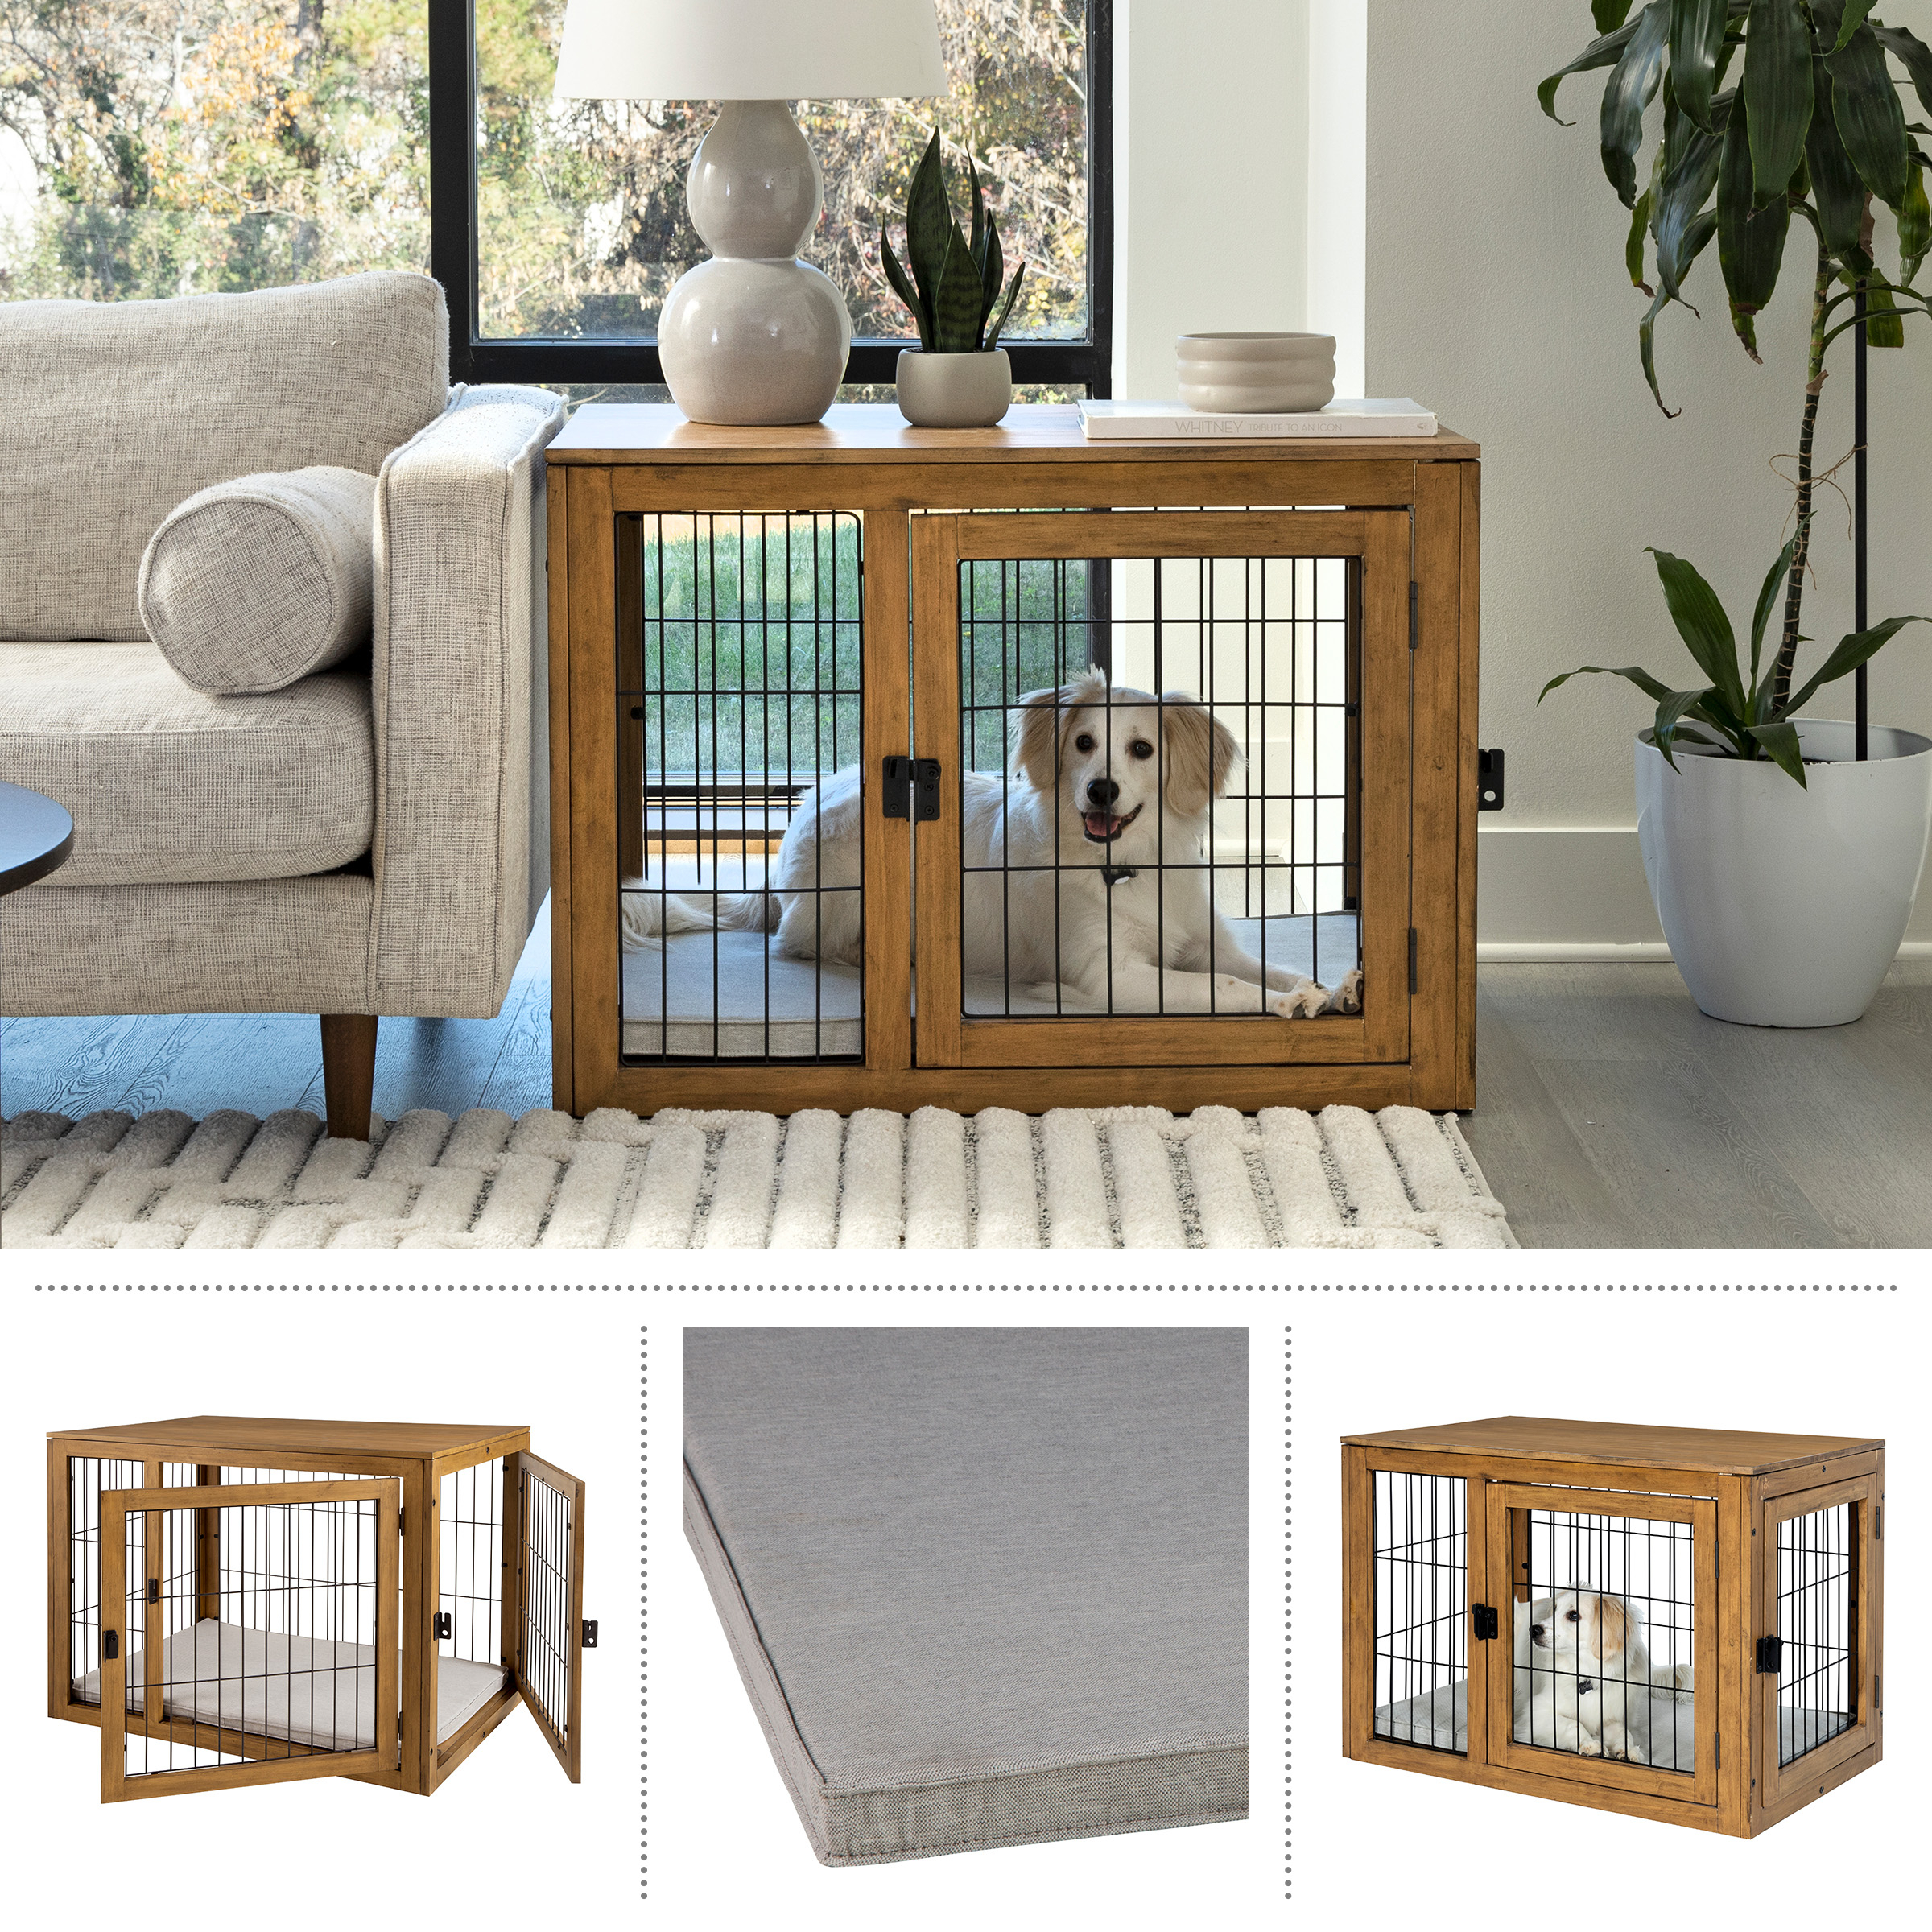 Furniture-Style Dog Crate - Acacia Wood Kennel For Medium Dogs With Double Doors And Cushion - Dog Cage Furniture By PETMAKER (Natural)